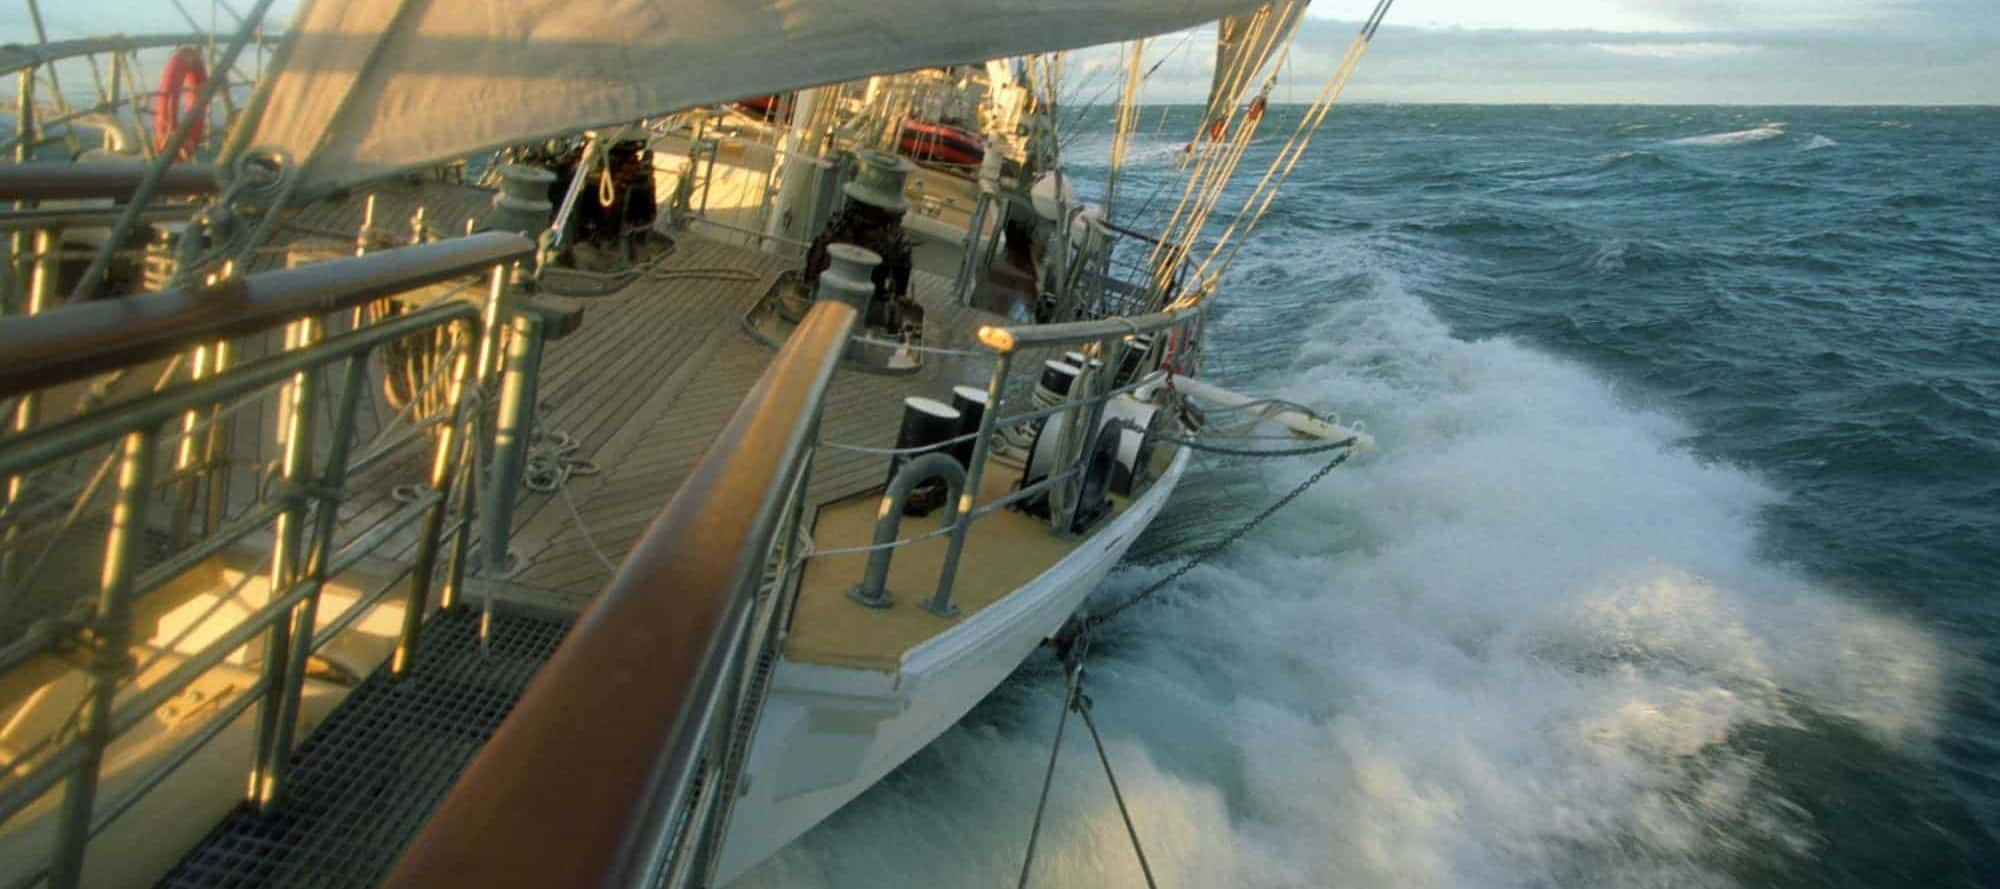 Tenacious has a bow sprit custom made to enable guests in a wheelchair to experience the bowsprit challenge. 